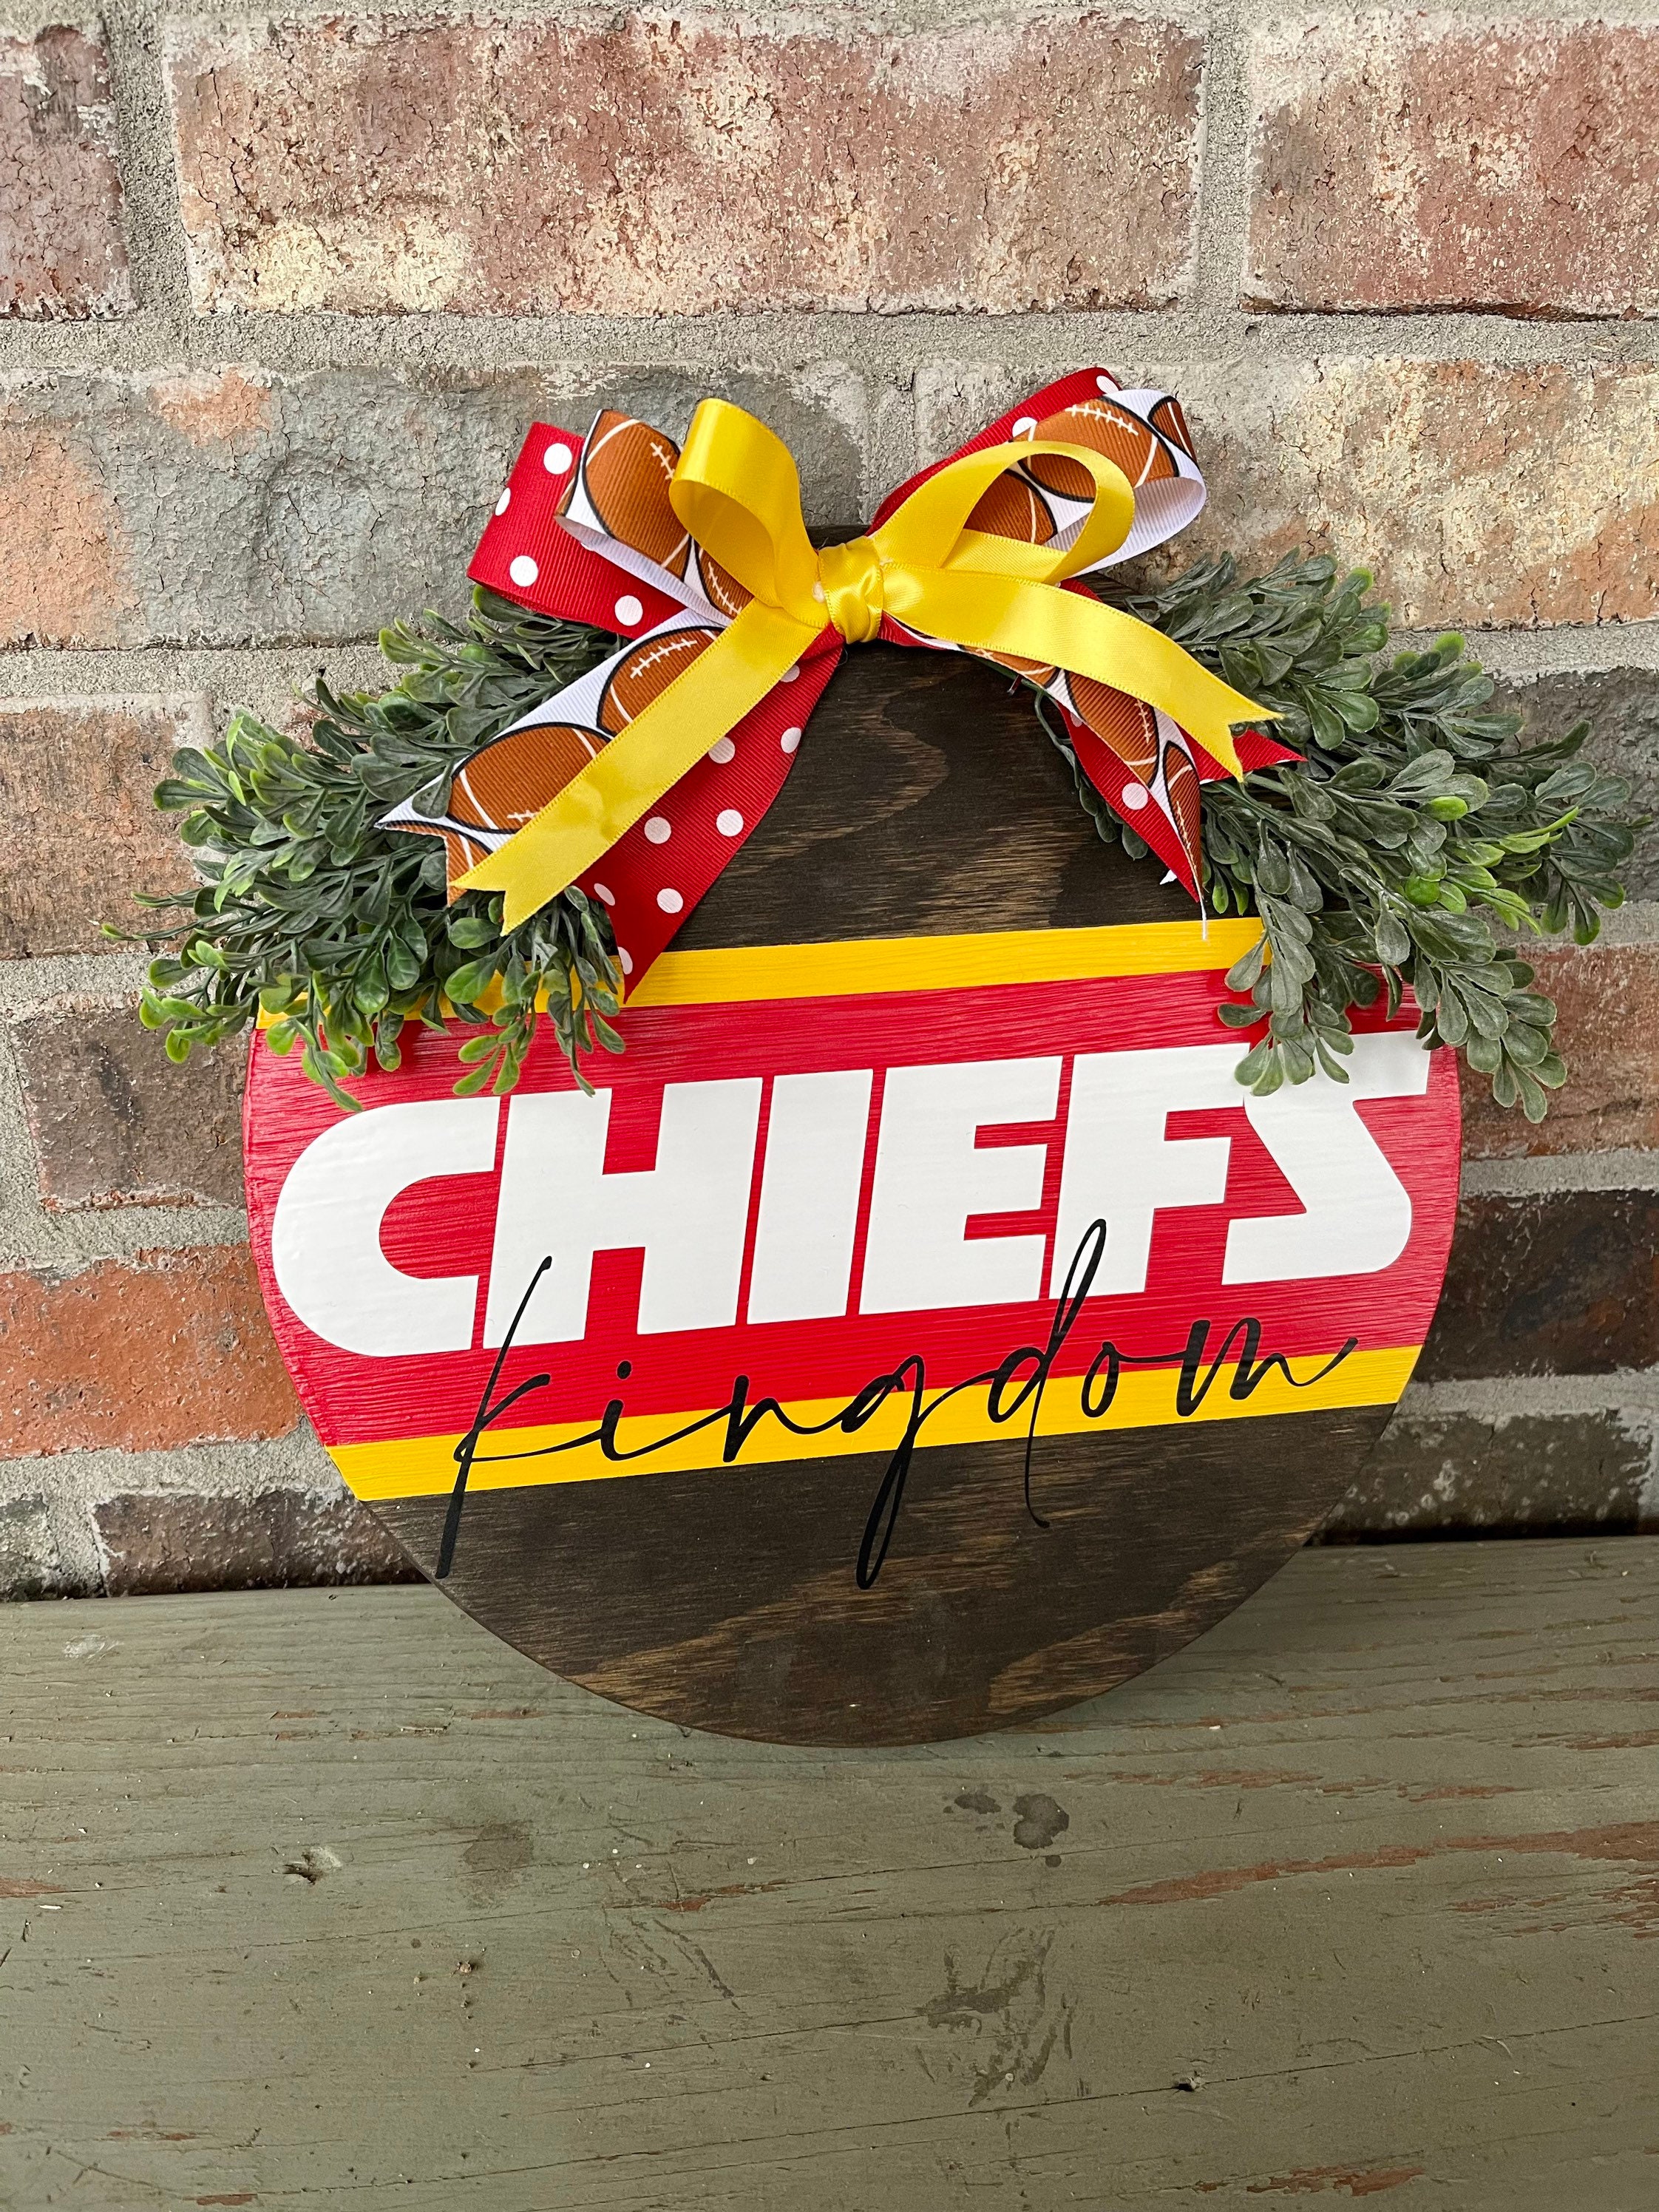 Kansas City Chiefs Wooden Football Helmet Sign by FOCO – Limited Edition NFL Wall Art in Team Colors – Has Metal Hook for Easy Hanging - Show Your